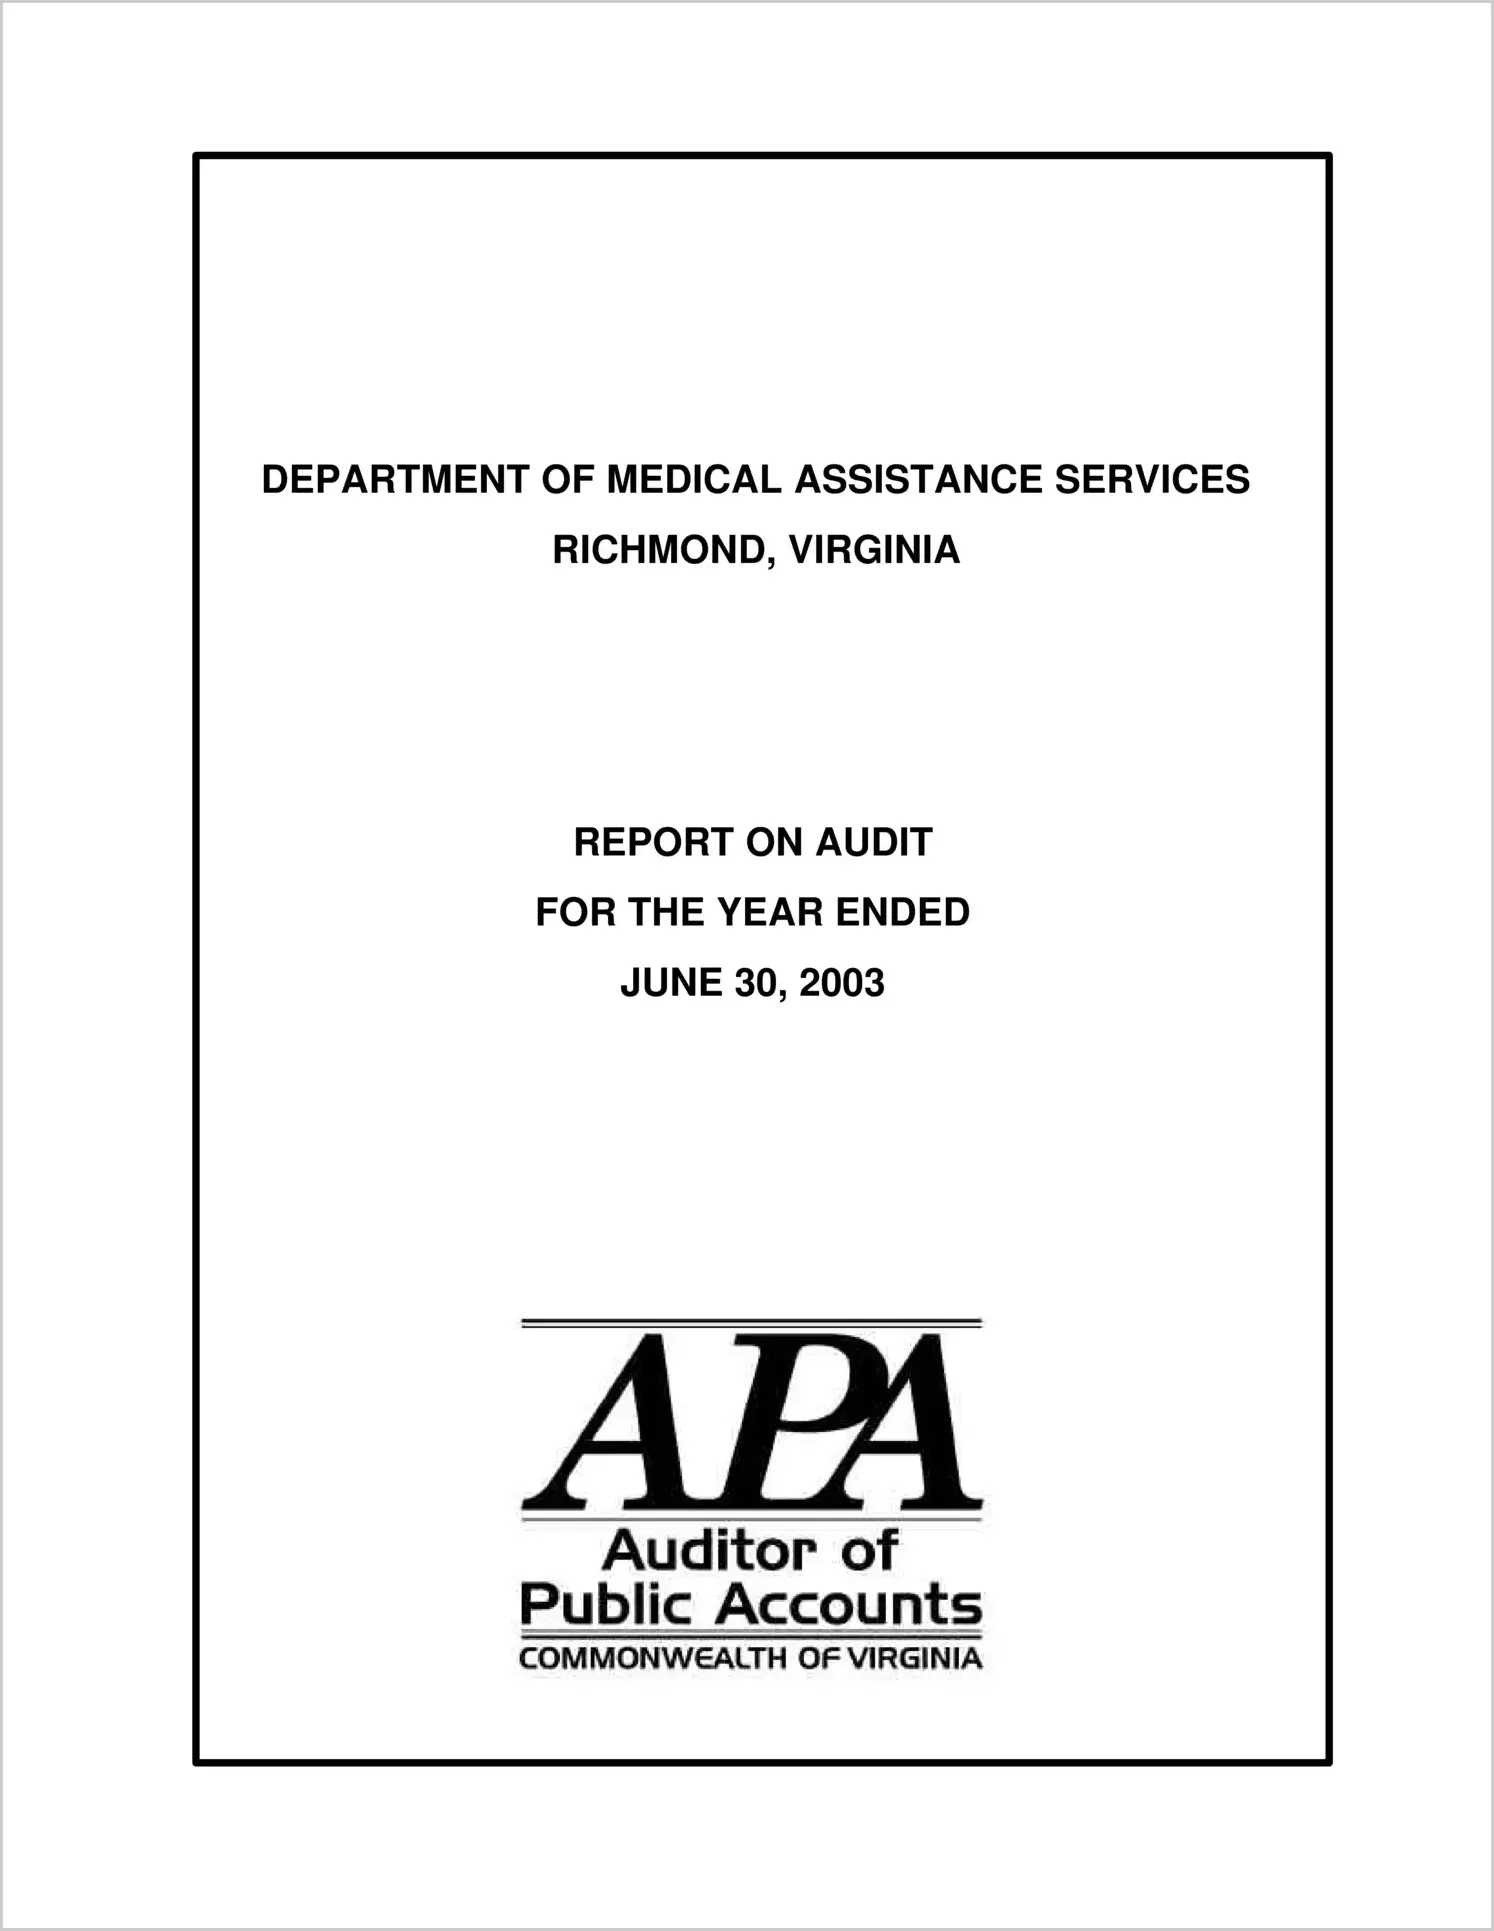 Department of Medical Assistance Services for the year ended June 30, 2003